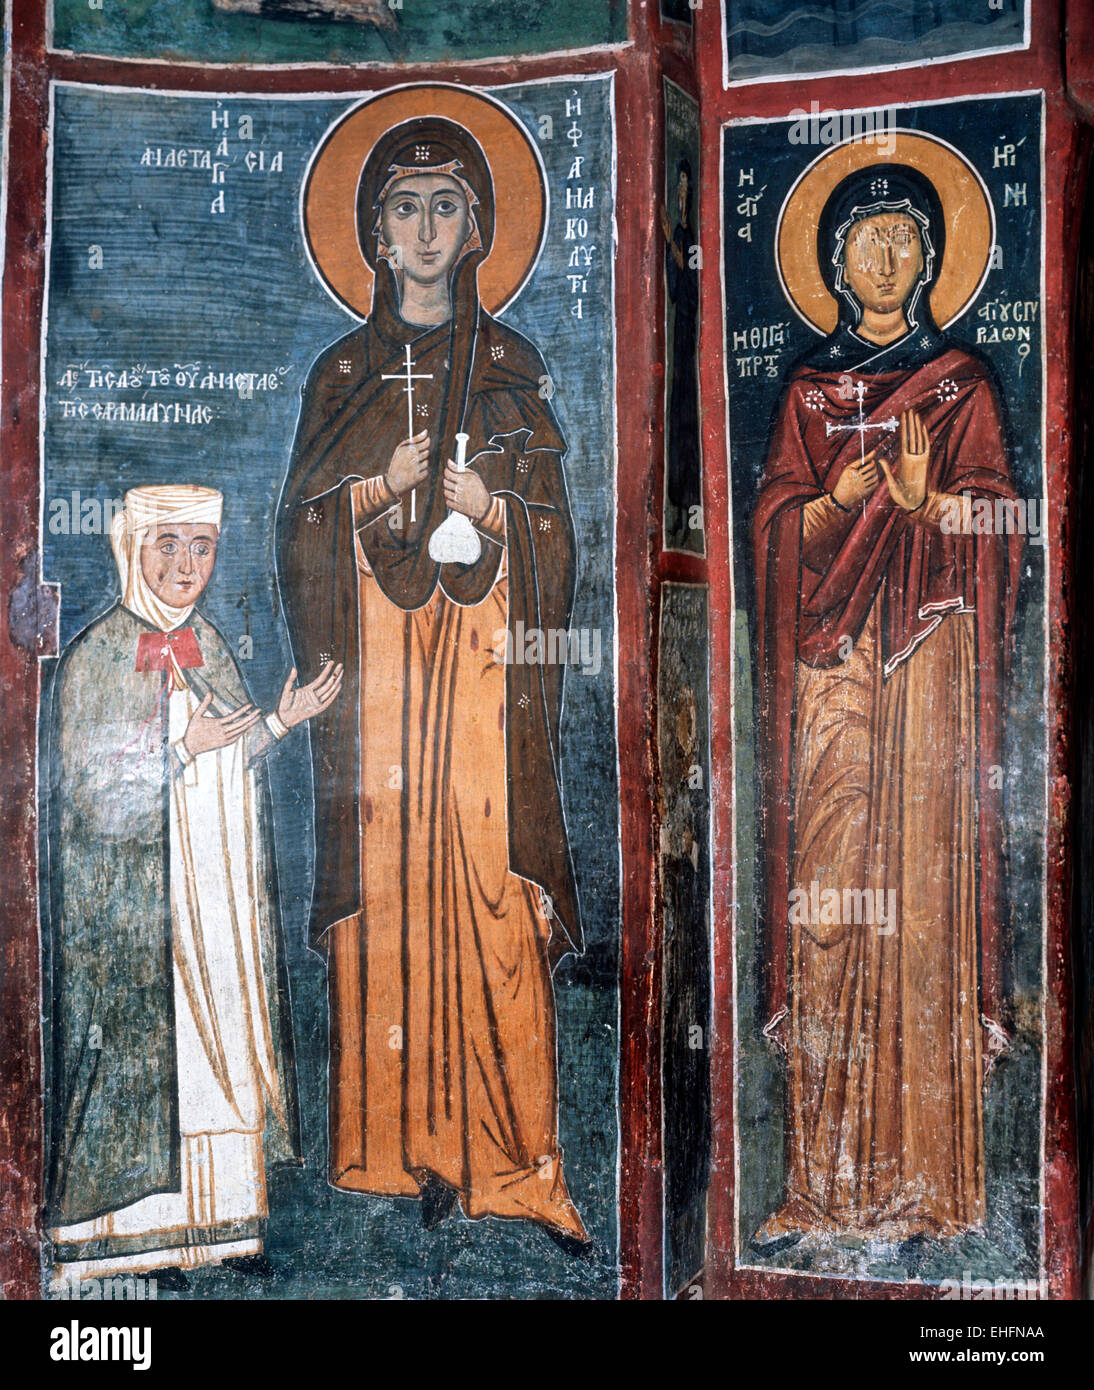 St Anastasia curer of poisons with supplicant, on right St Irene 12C-13C, Church of Our Lady of the Pastures, Asinou, Cyprus Stock Photo